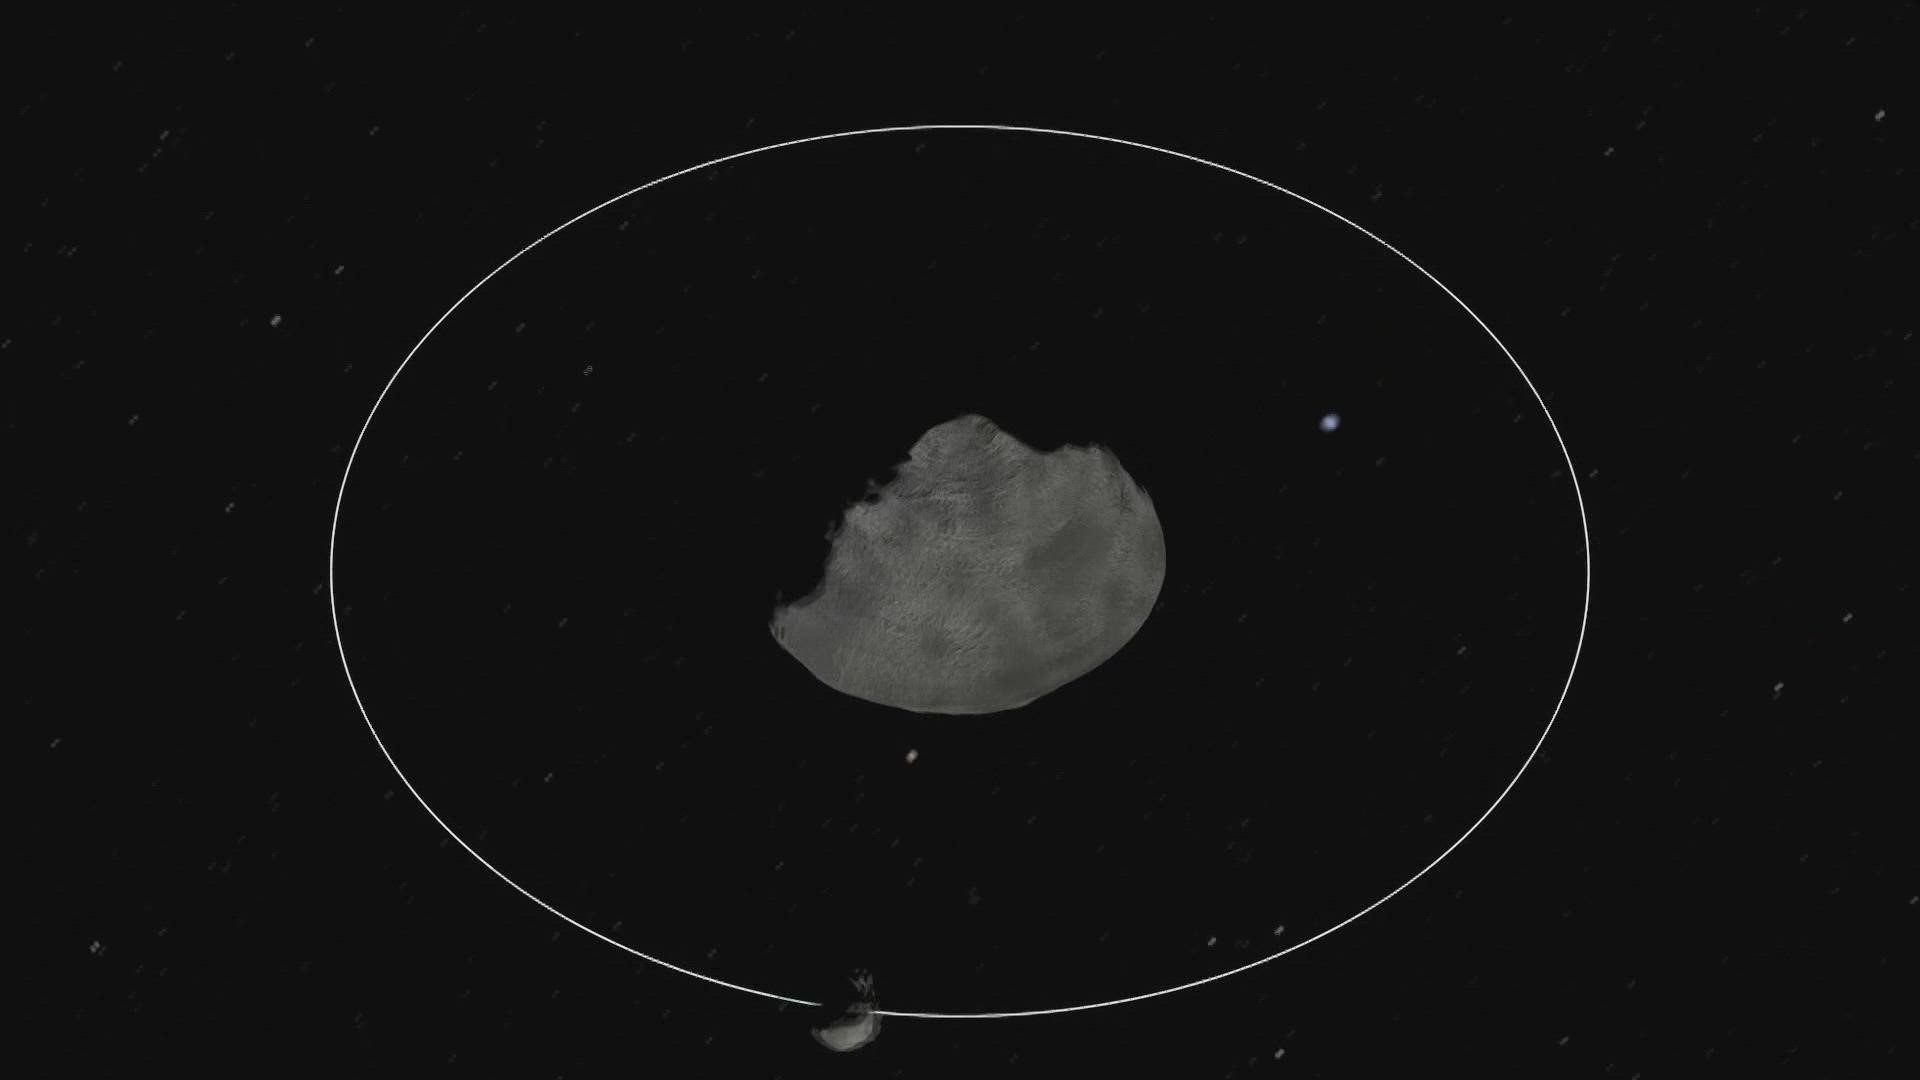 Scientists expected the impact to carve out a crater, hurl streams of rocks and dirt into space and, most importantly, alter the asteroid’s orbit.